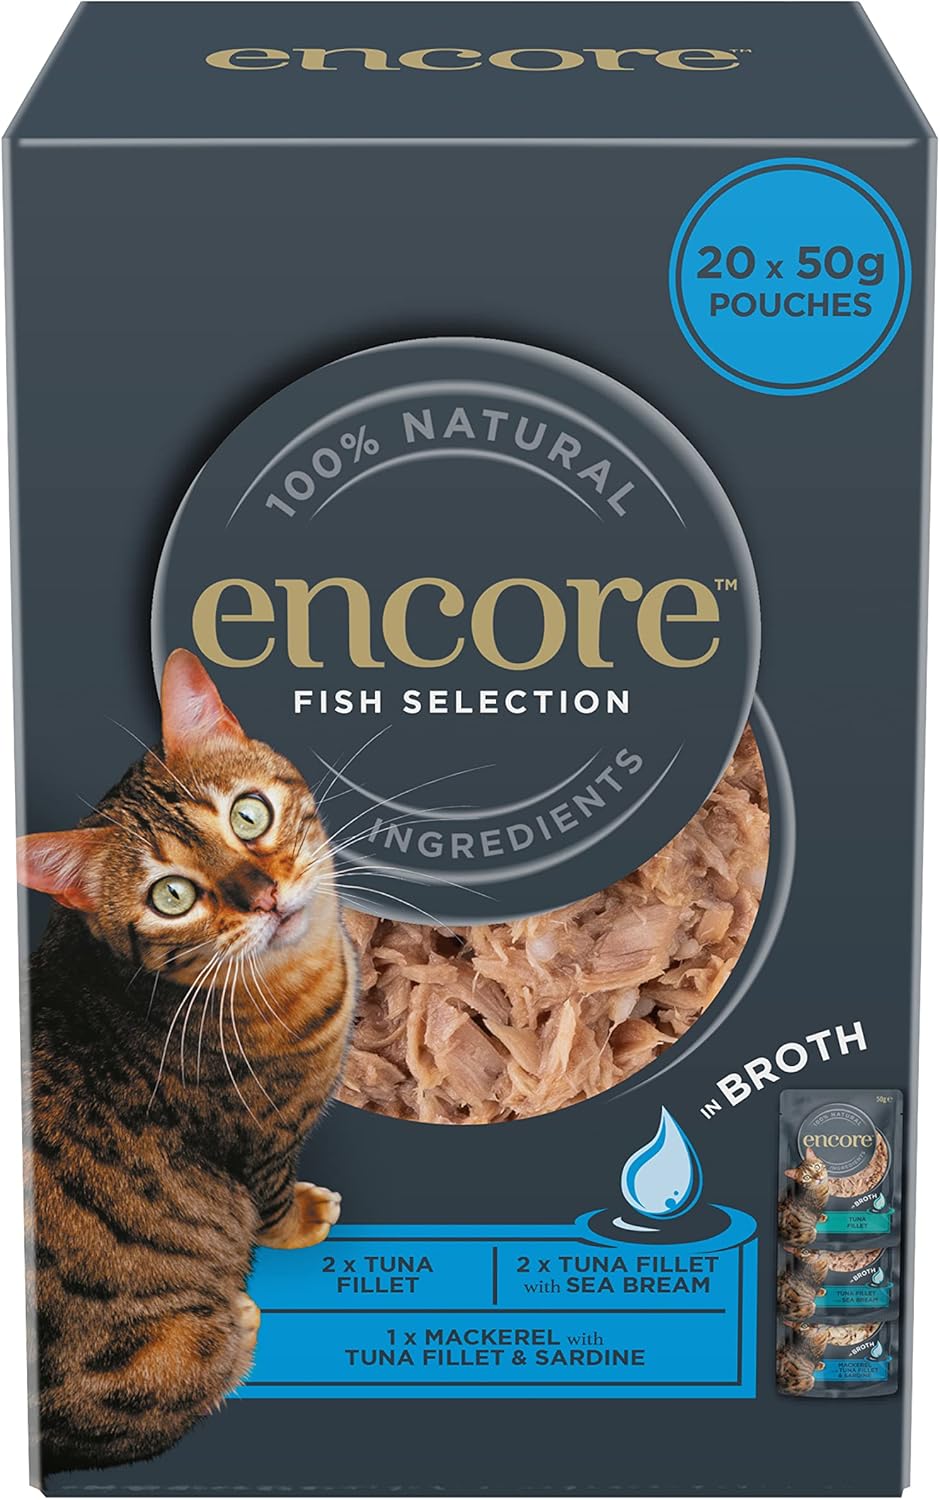 Encore 100% Natural Wet Cat Food, Fish Selection in Broth 50g Pouch (20 x 50g Pouches)?ENC8116-1EN